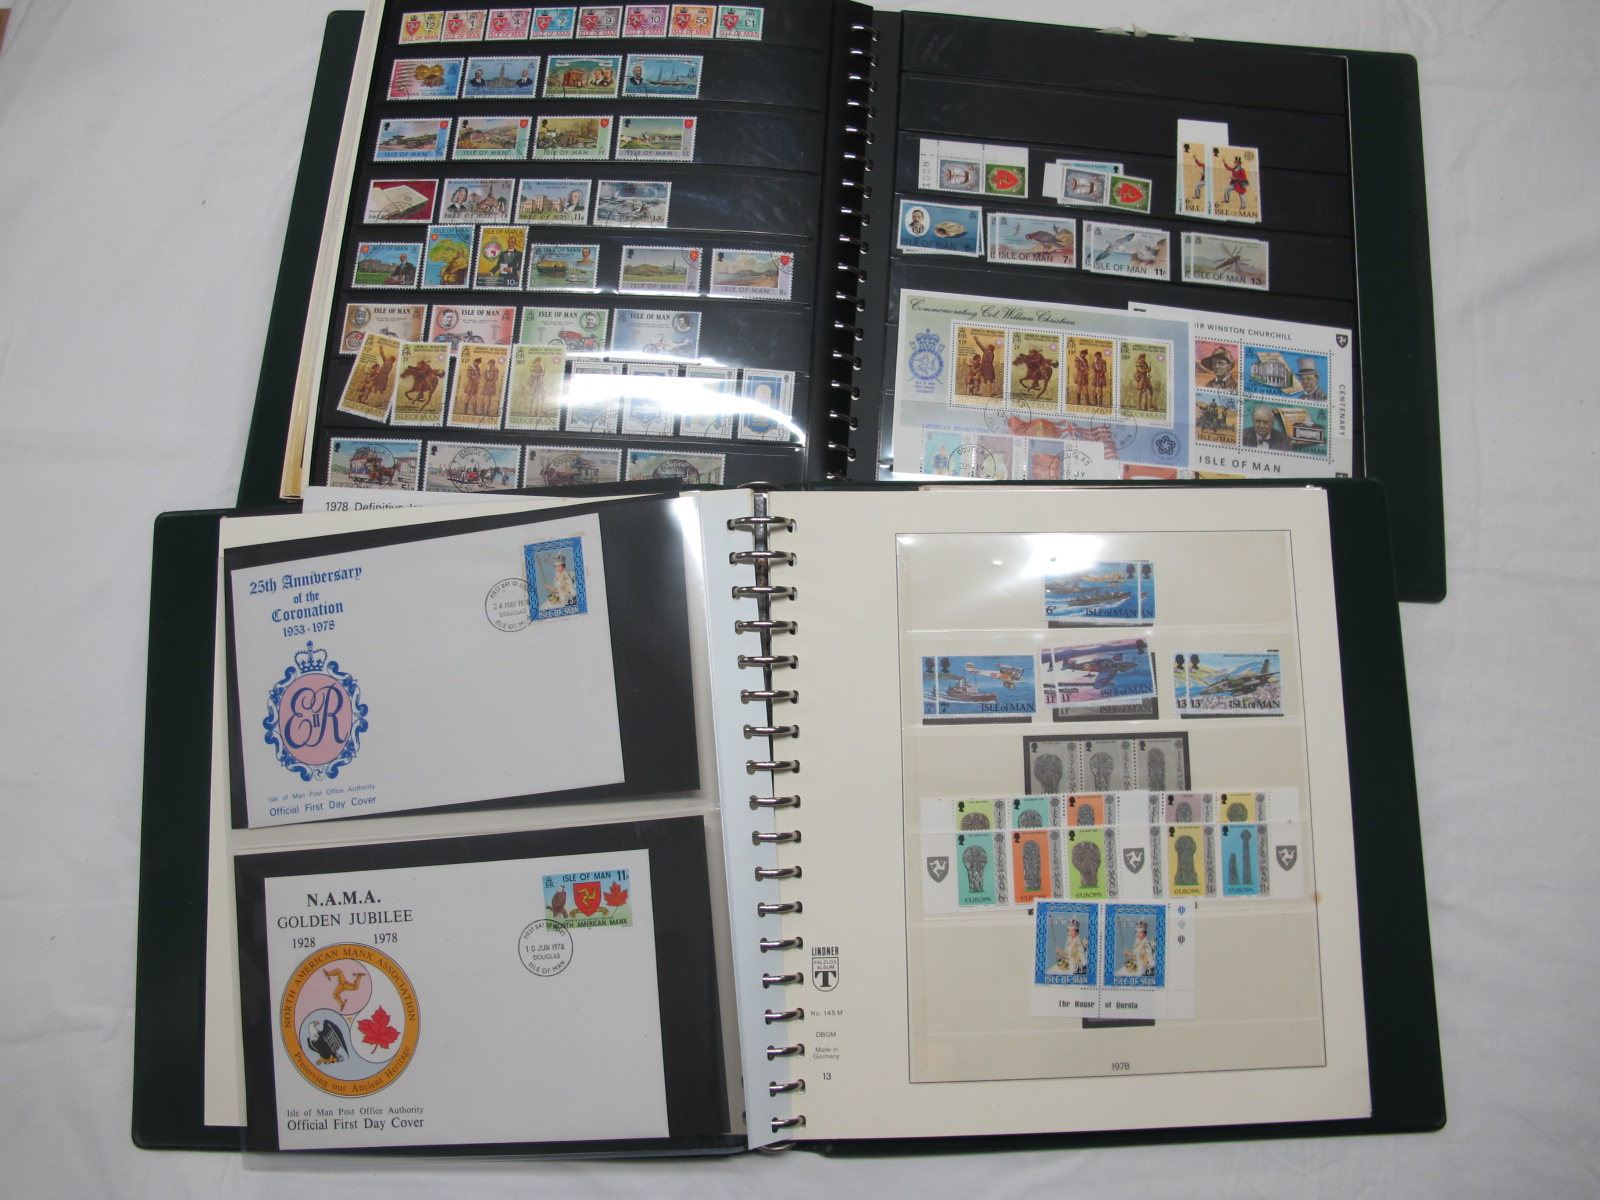 Two Lindner Hingless Albums, containing a collection of mint Isle of Man Stamps, FDC's, issues